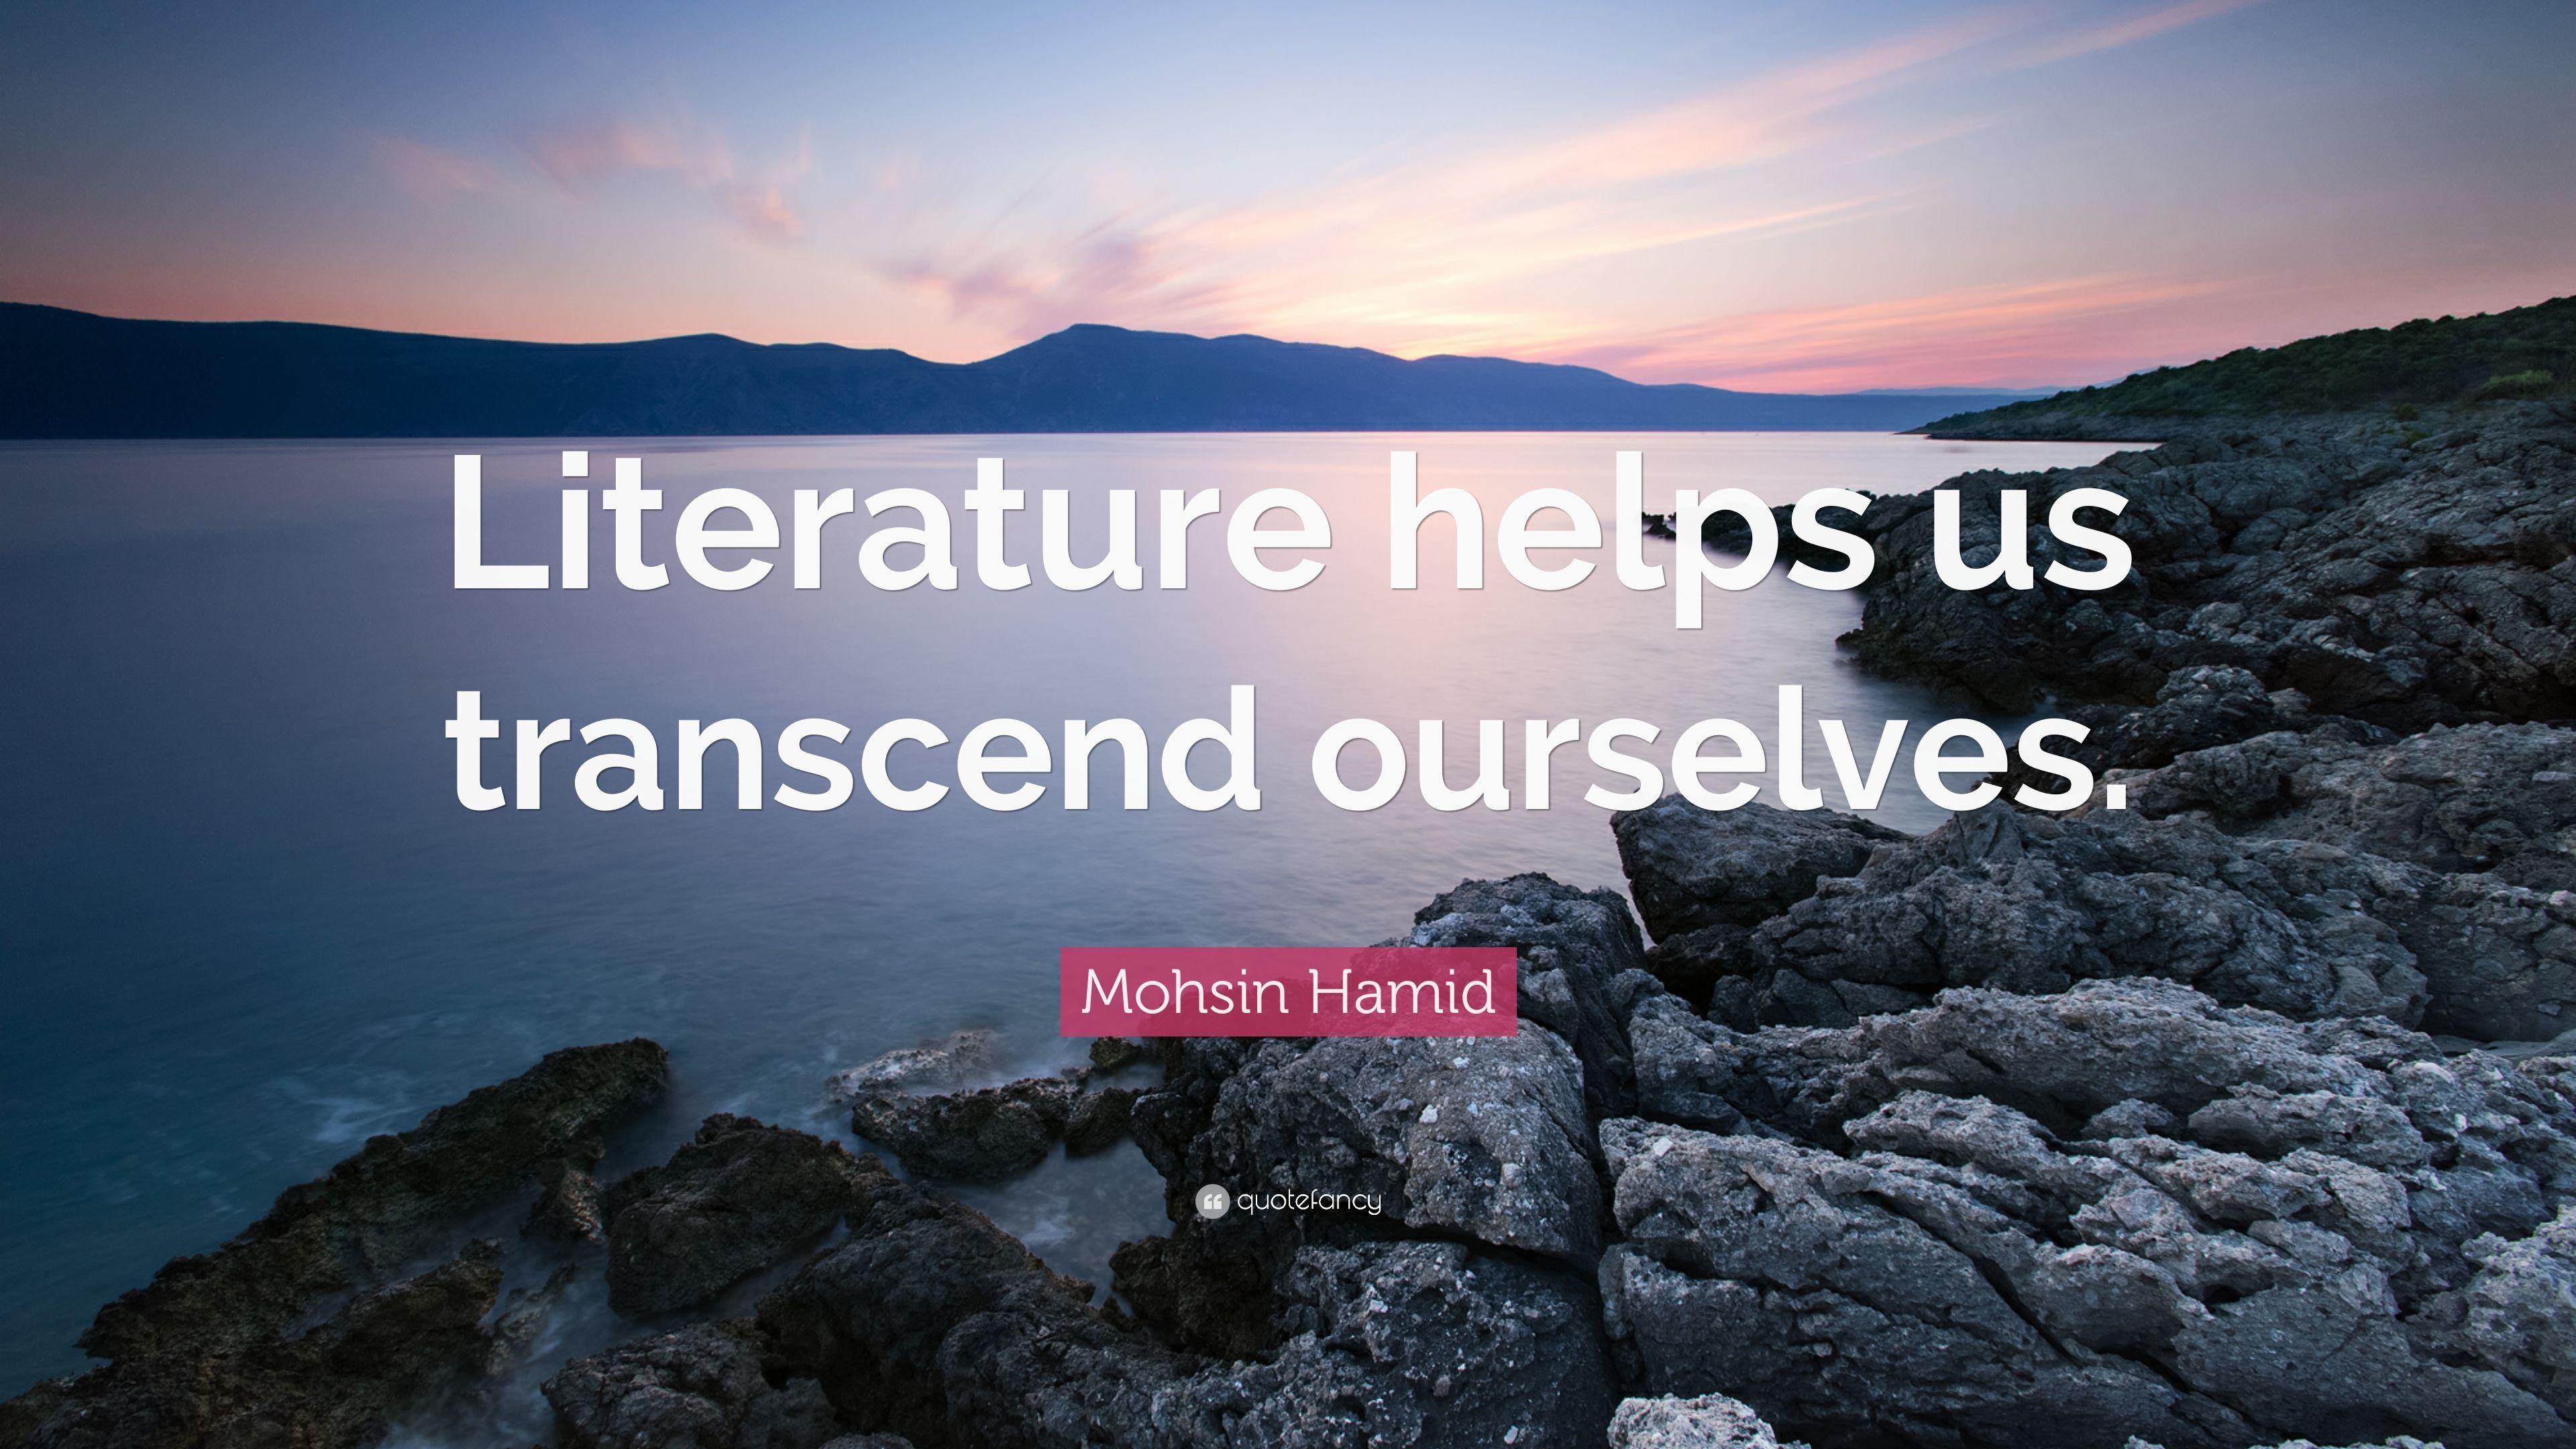 Mohsin Hamid Quote: “Literature helps us transcend ourselves.” 7